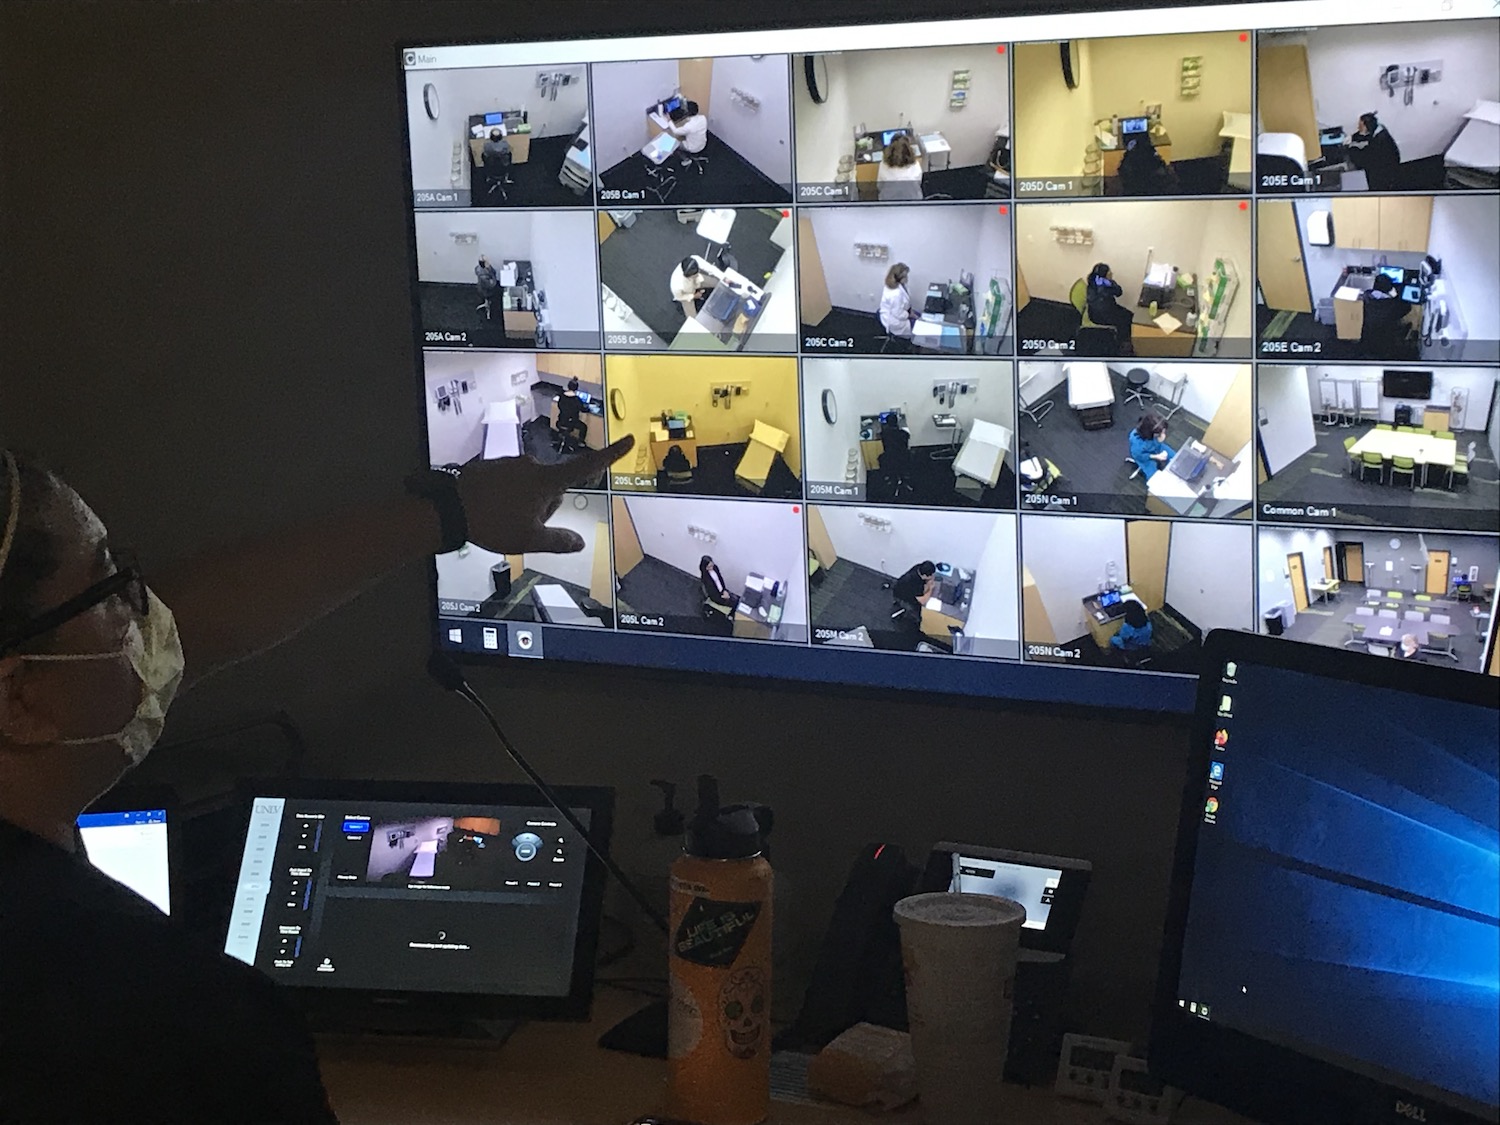 Monitor showing images of people in different rooms